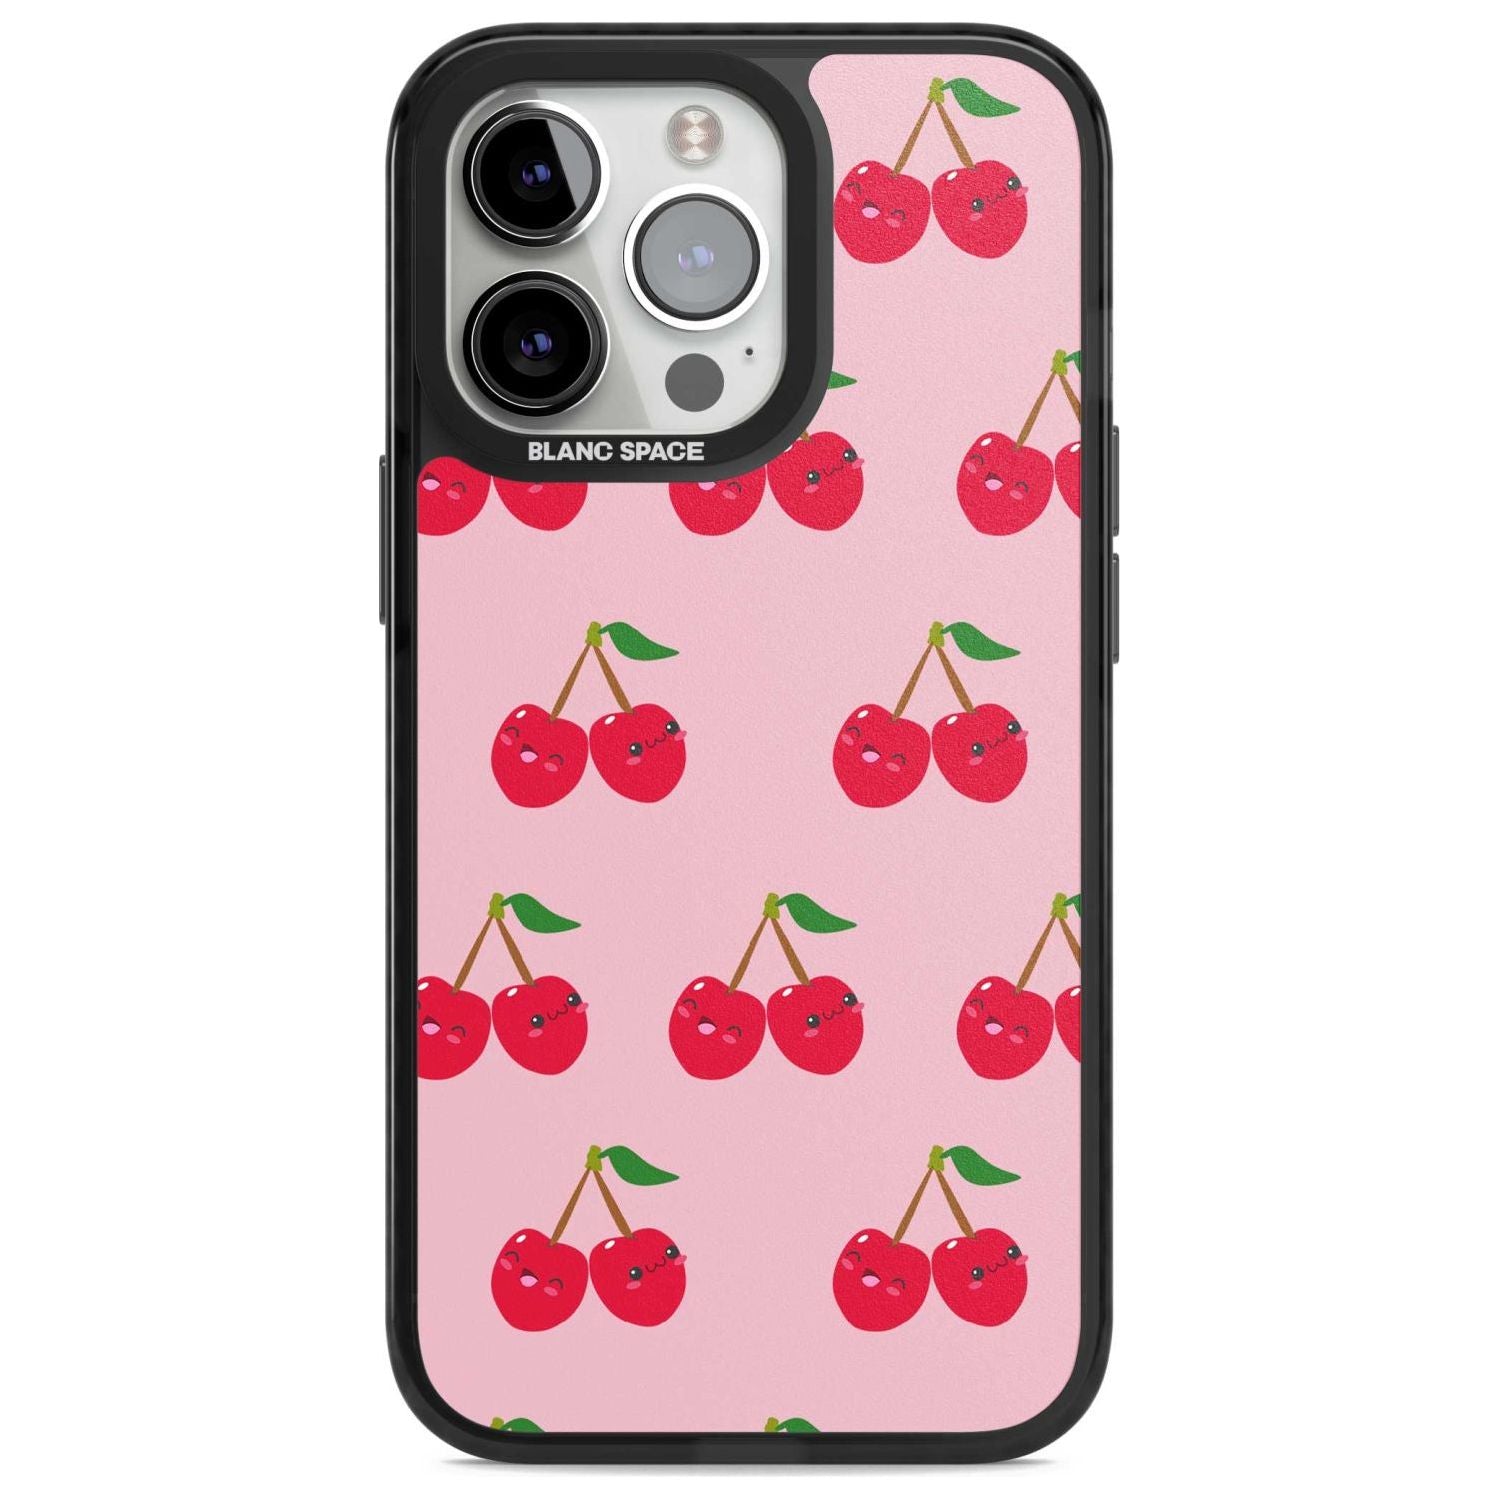 Cheeky Cherry Phone Case iPhone 15 Pro / Magsafe Black Impact Case,iPhone 15 Pro Max / Magsafe Black Impact Case,iPhone 14 Pro Max / Magsafe Black Impact Case,iPhone 13 Pro / Magsafe Black Impact Case,iPhone 14 Pro / Magsafe Black Impact Case Blanc Space